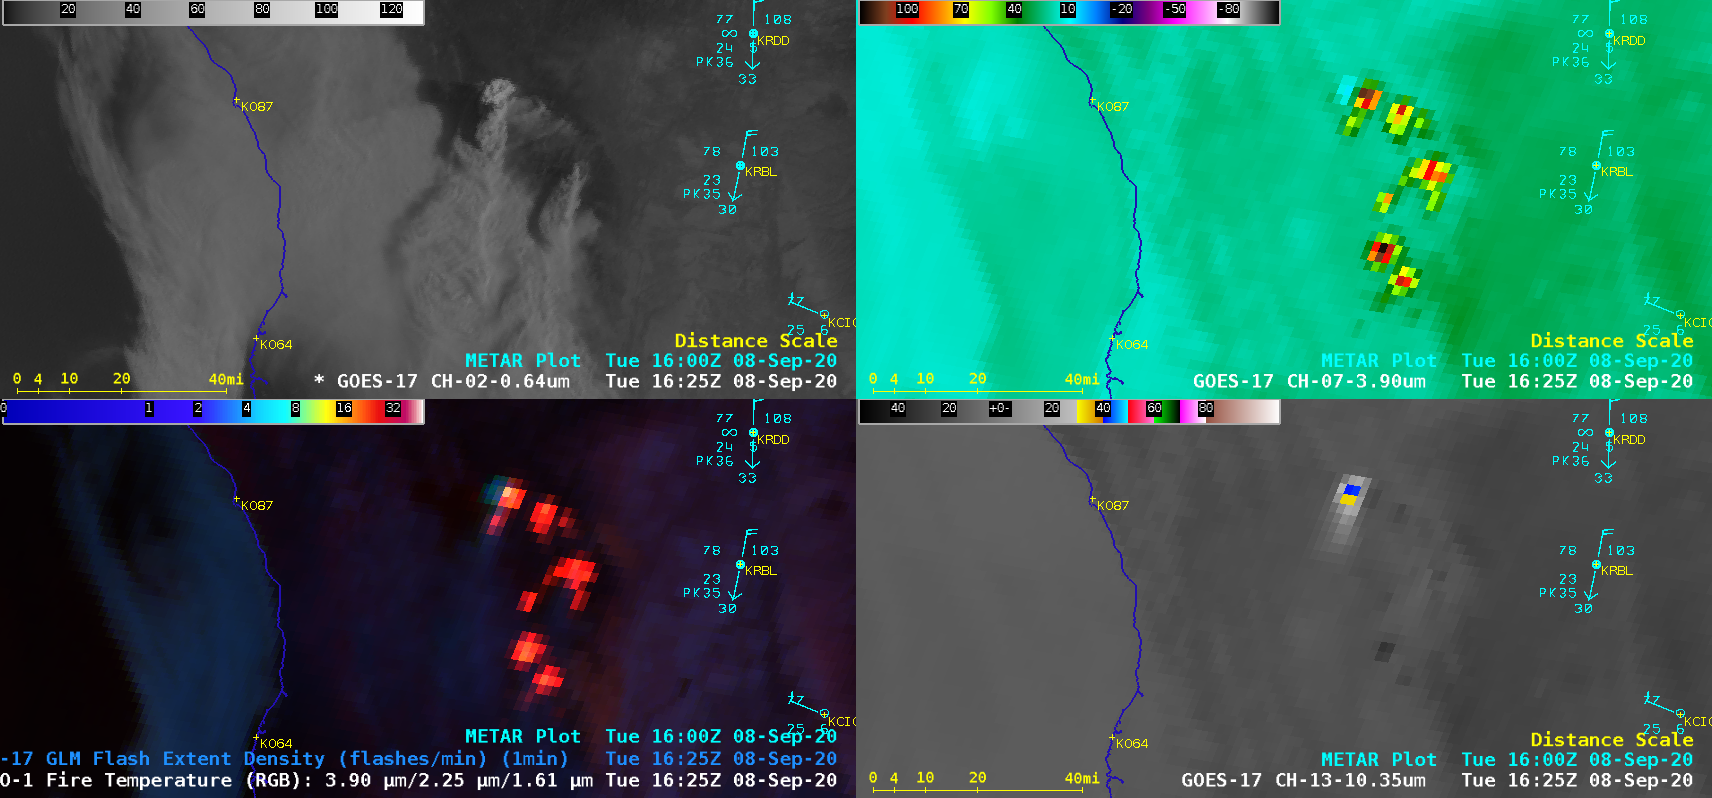 GOES-17 “Red” Visible (0.64 µm, top left), Shortwave Infrared (3.9 µm, top right), Fire Temperature RGB + GLM Flash Extent Density (bottom left) and “Clean” Infrared Window (10.35 µm, bottom right) [click to play animation | MP4]